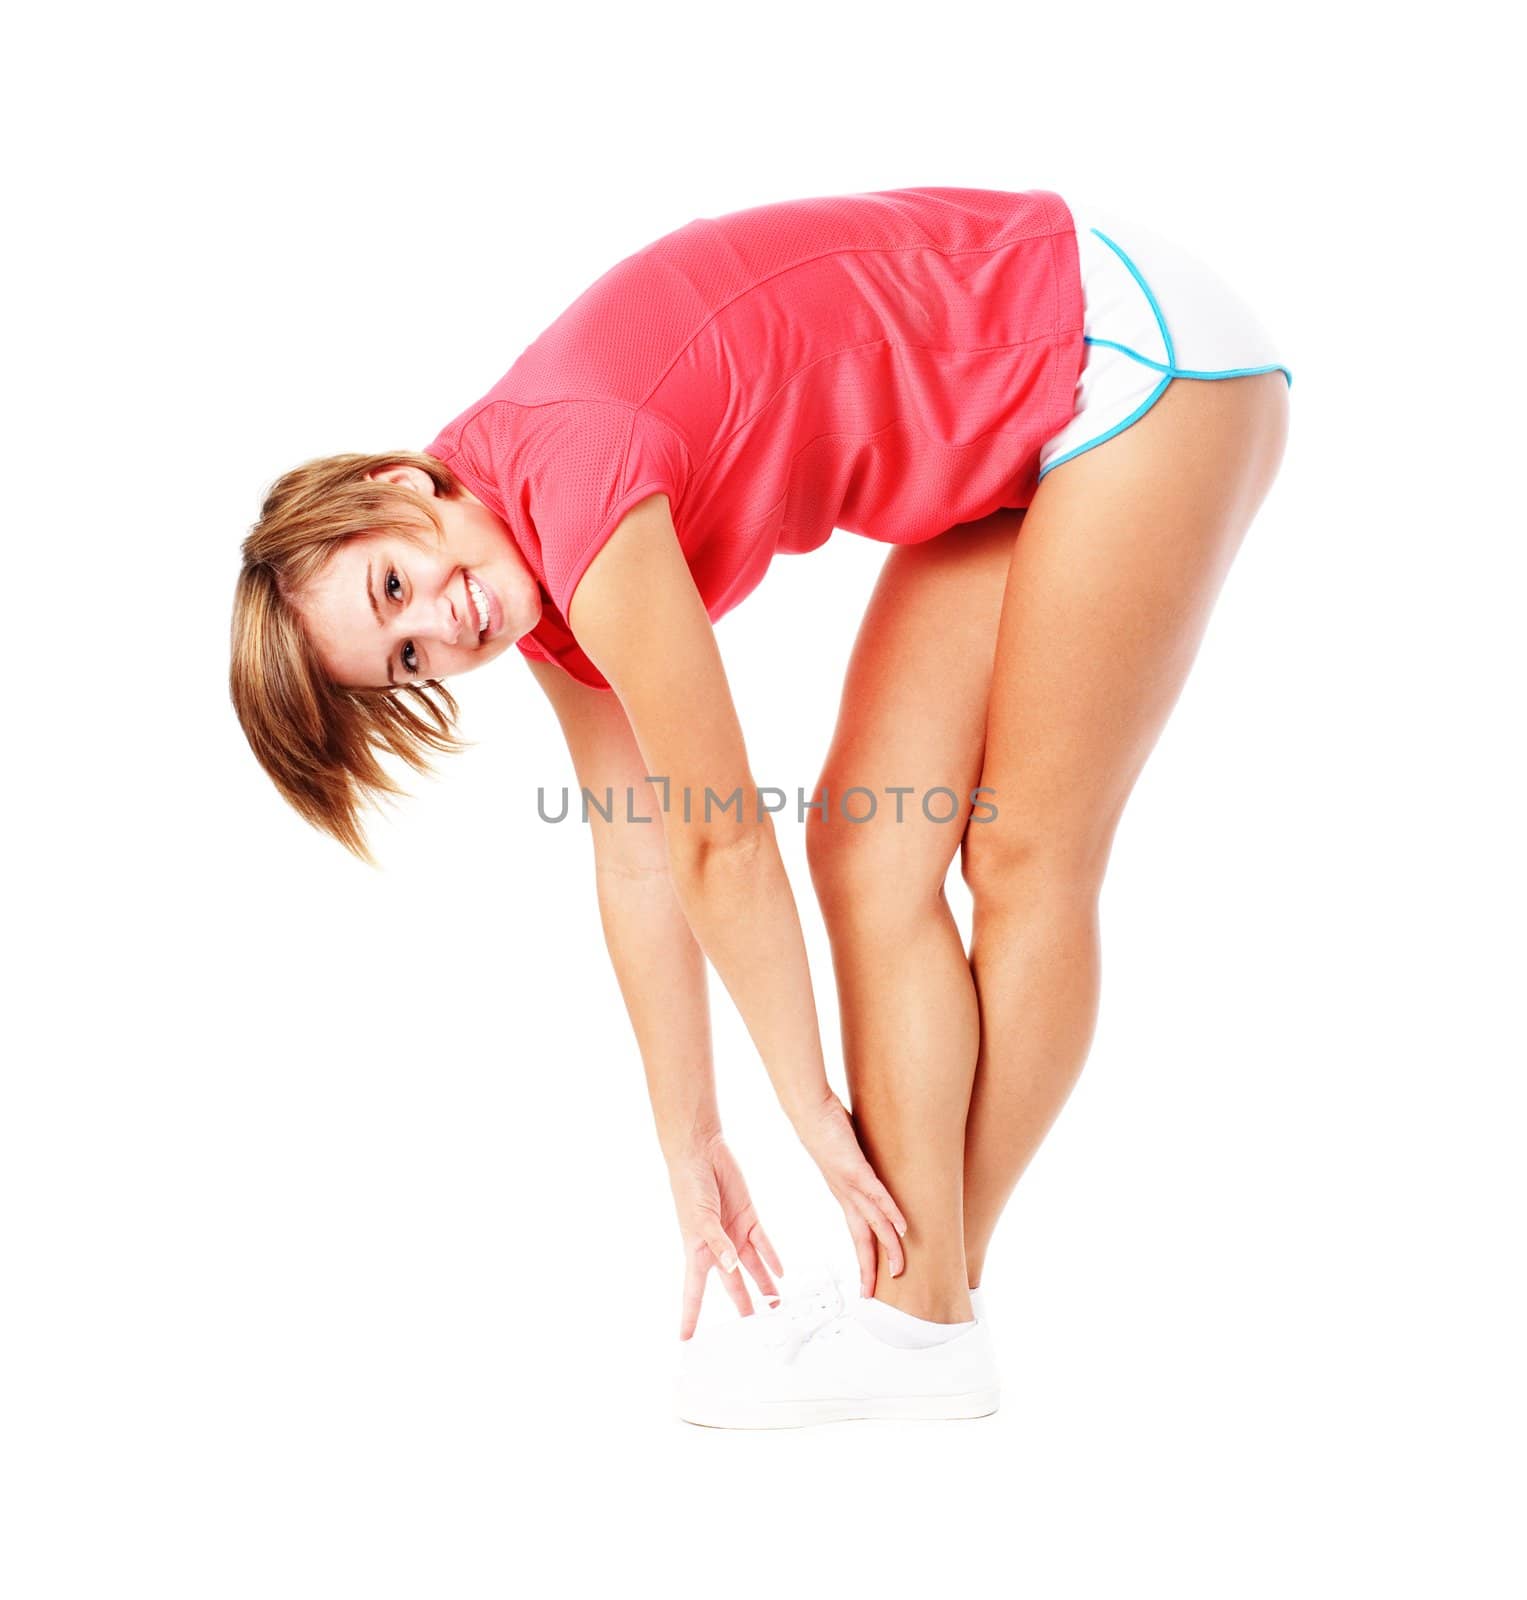 Young woman in red shirt stretching, isolated on white, from a complete series of photos.